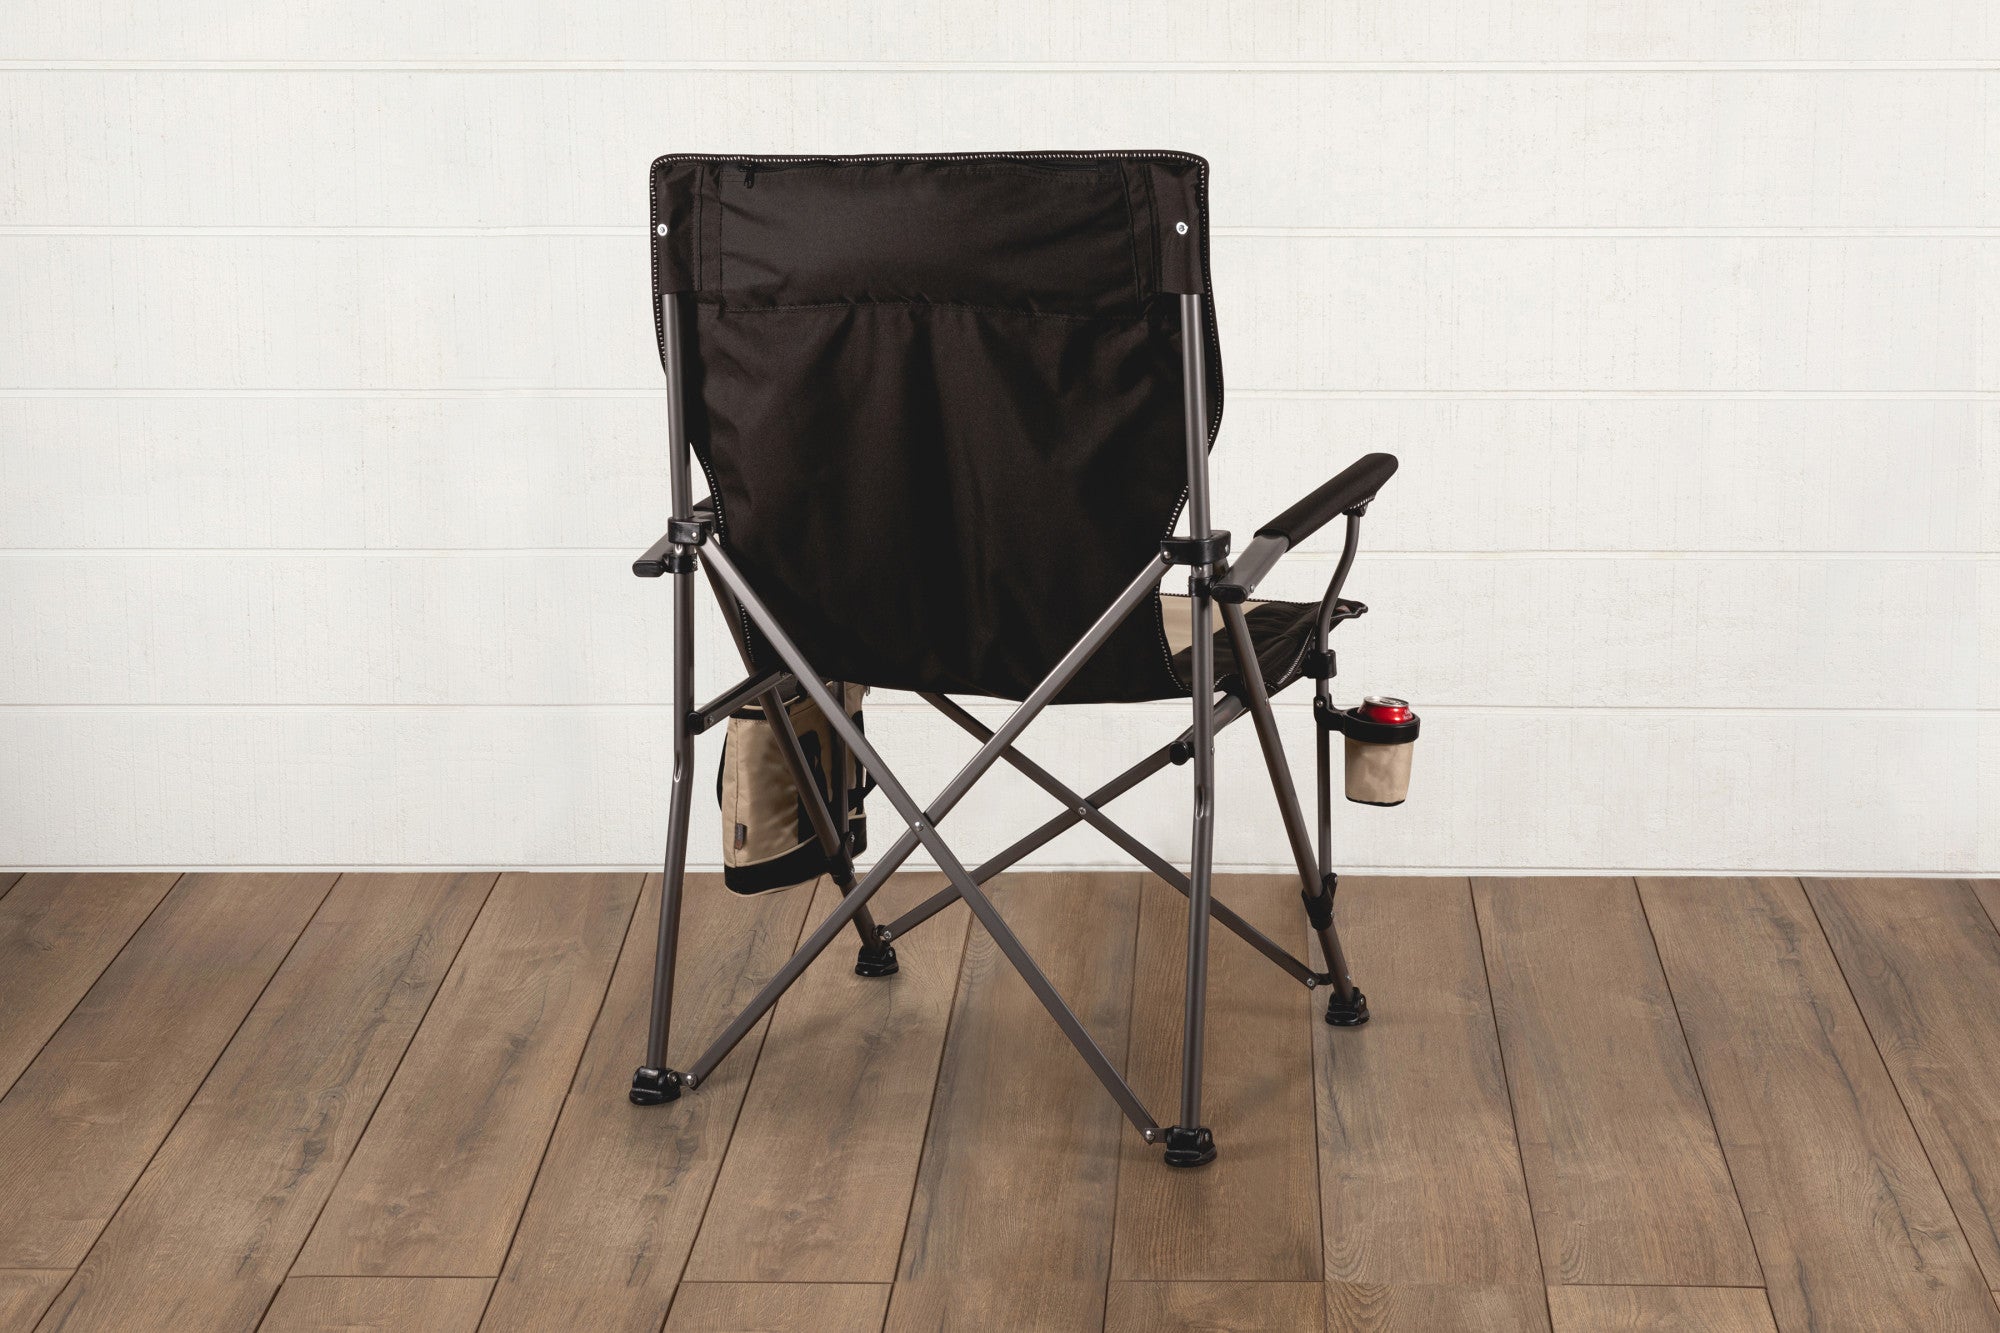 Wyoming Cowboys - Big Bear XXL Camping Chair with Cooler